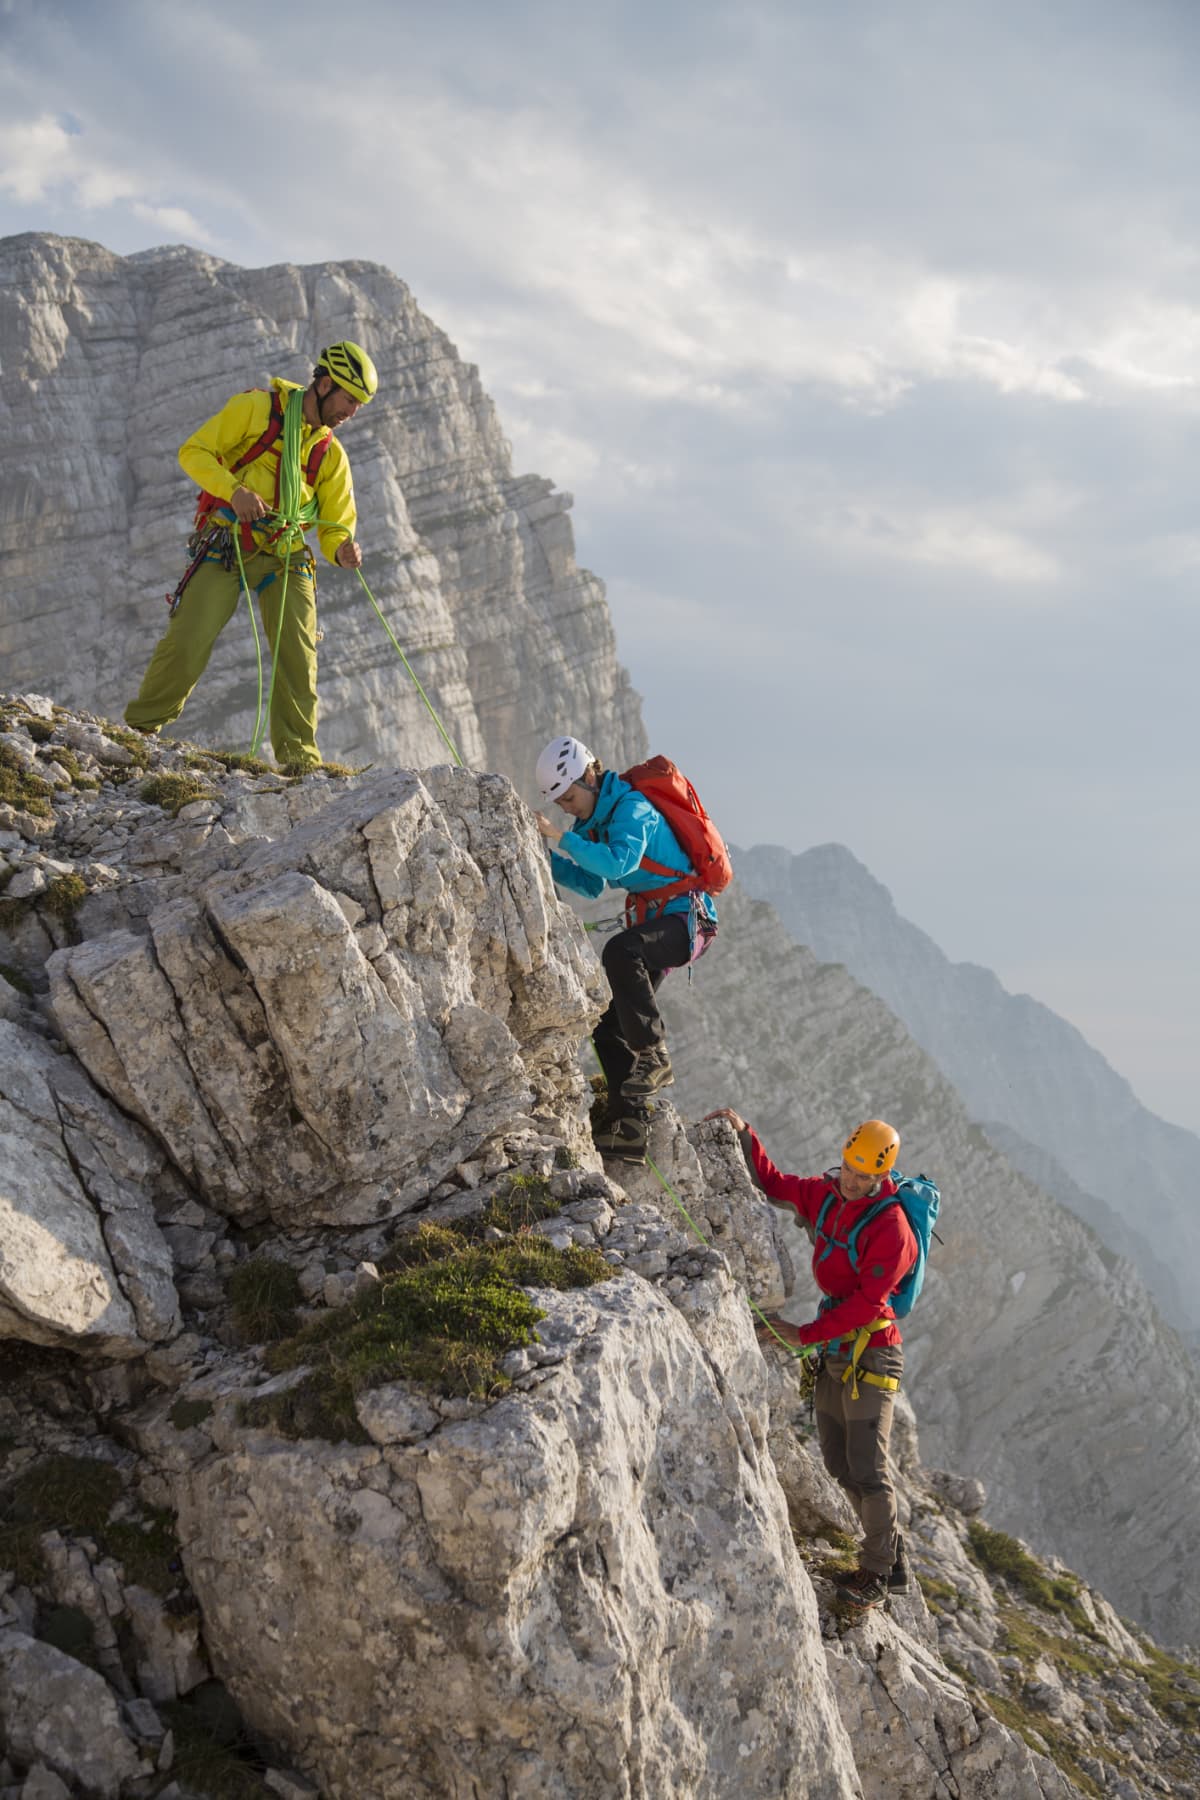 Three men climbing a moutain with fulll gear and backpacks